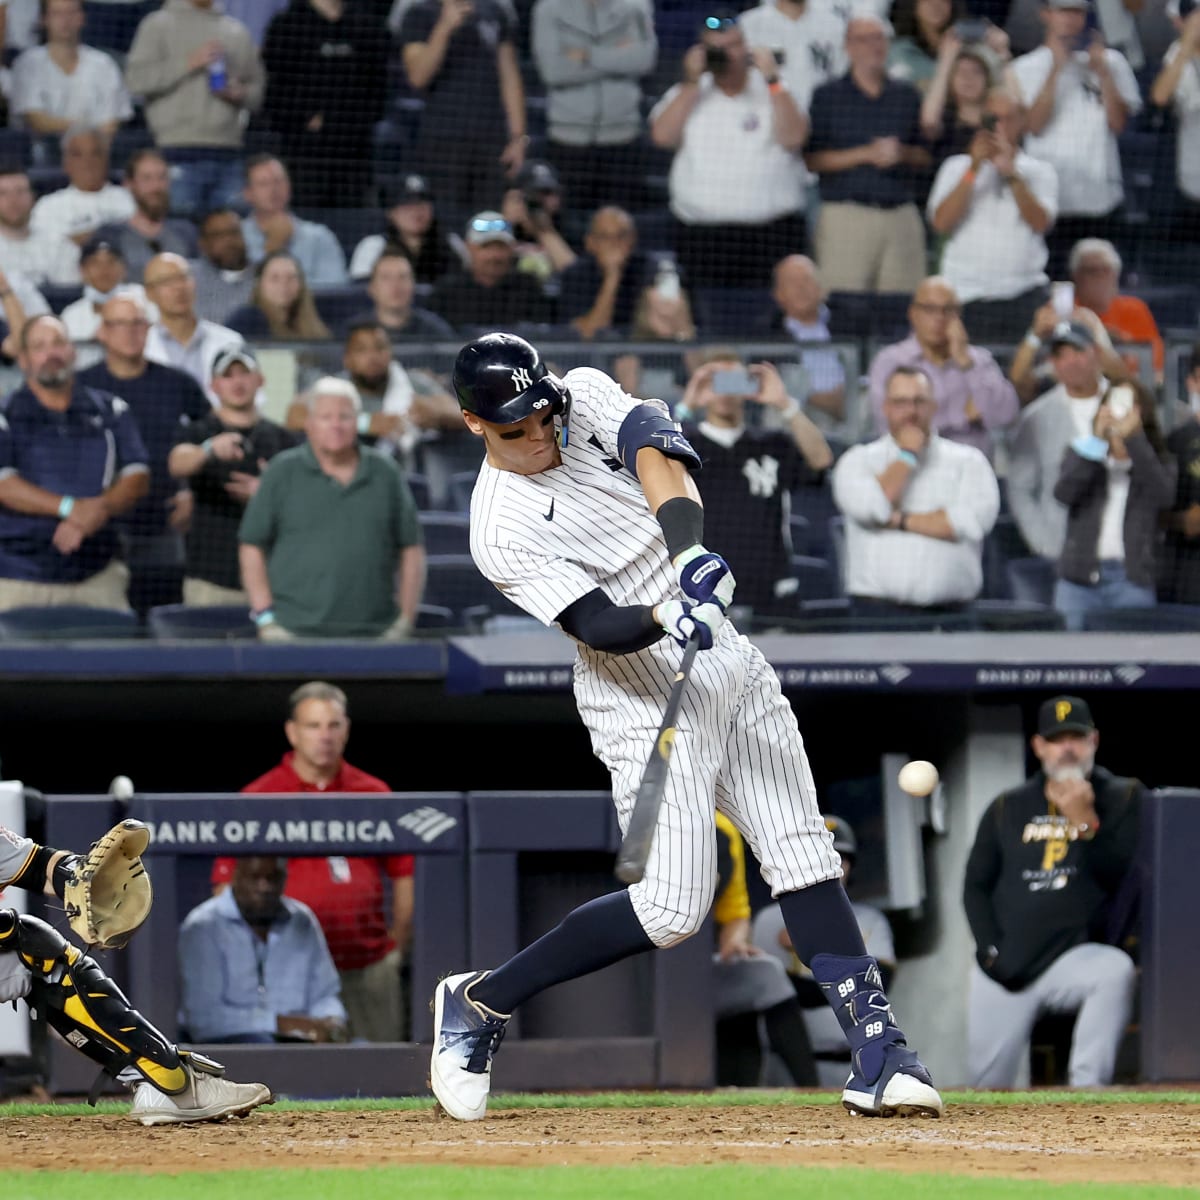 Judge Hits 62nd HR, Yankees Lose Meaningless Game 3-2 - Pinstripes Nation